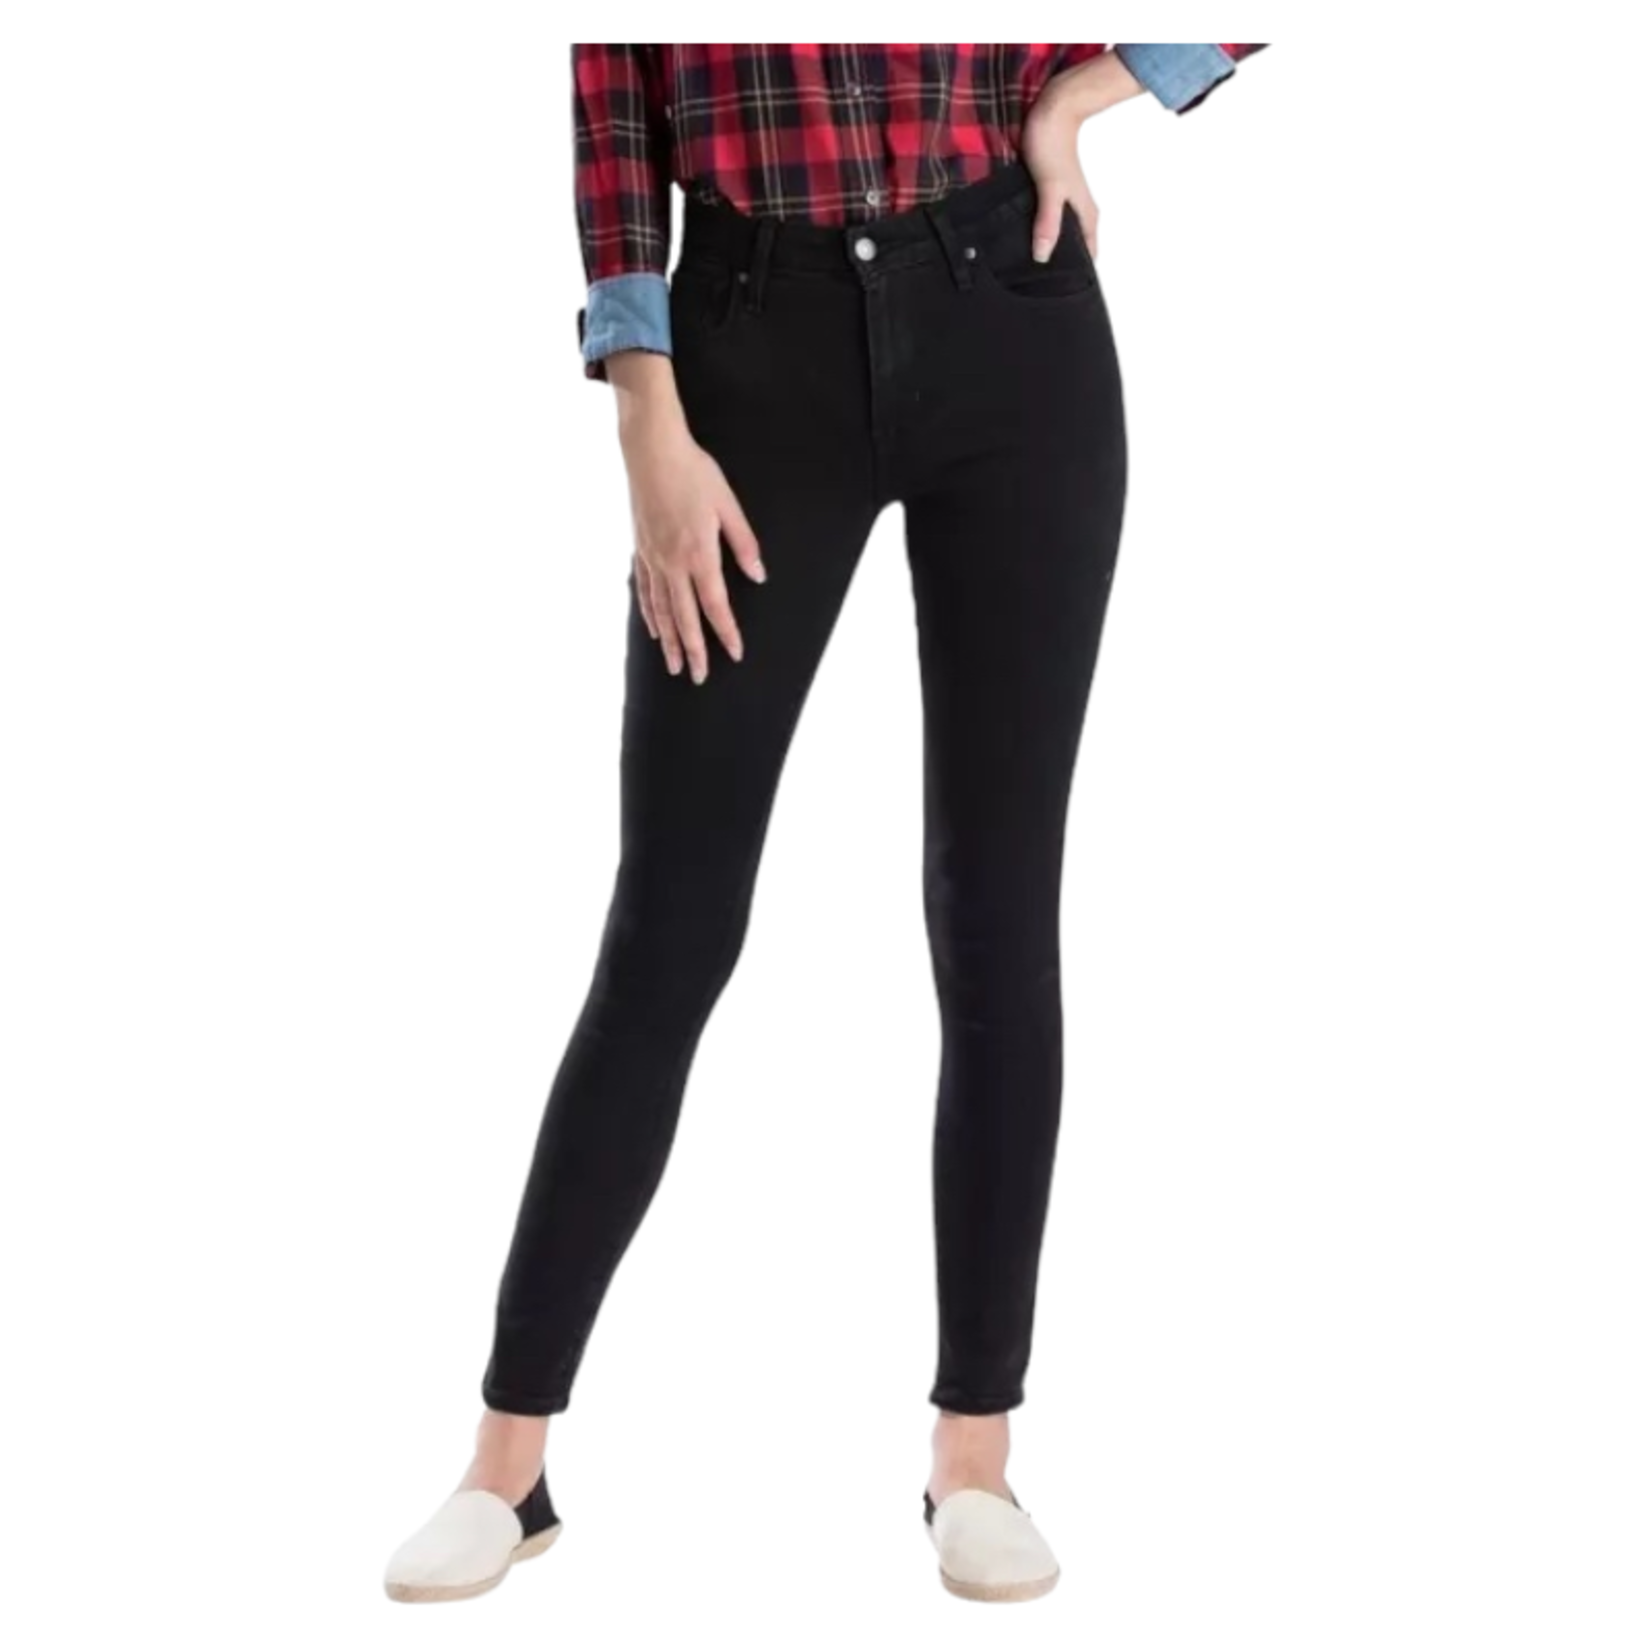 LEVIS 721 HIGH RISE SKINNY 18882-0024 - Michael's and Jody's